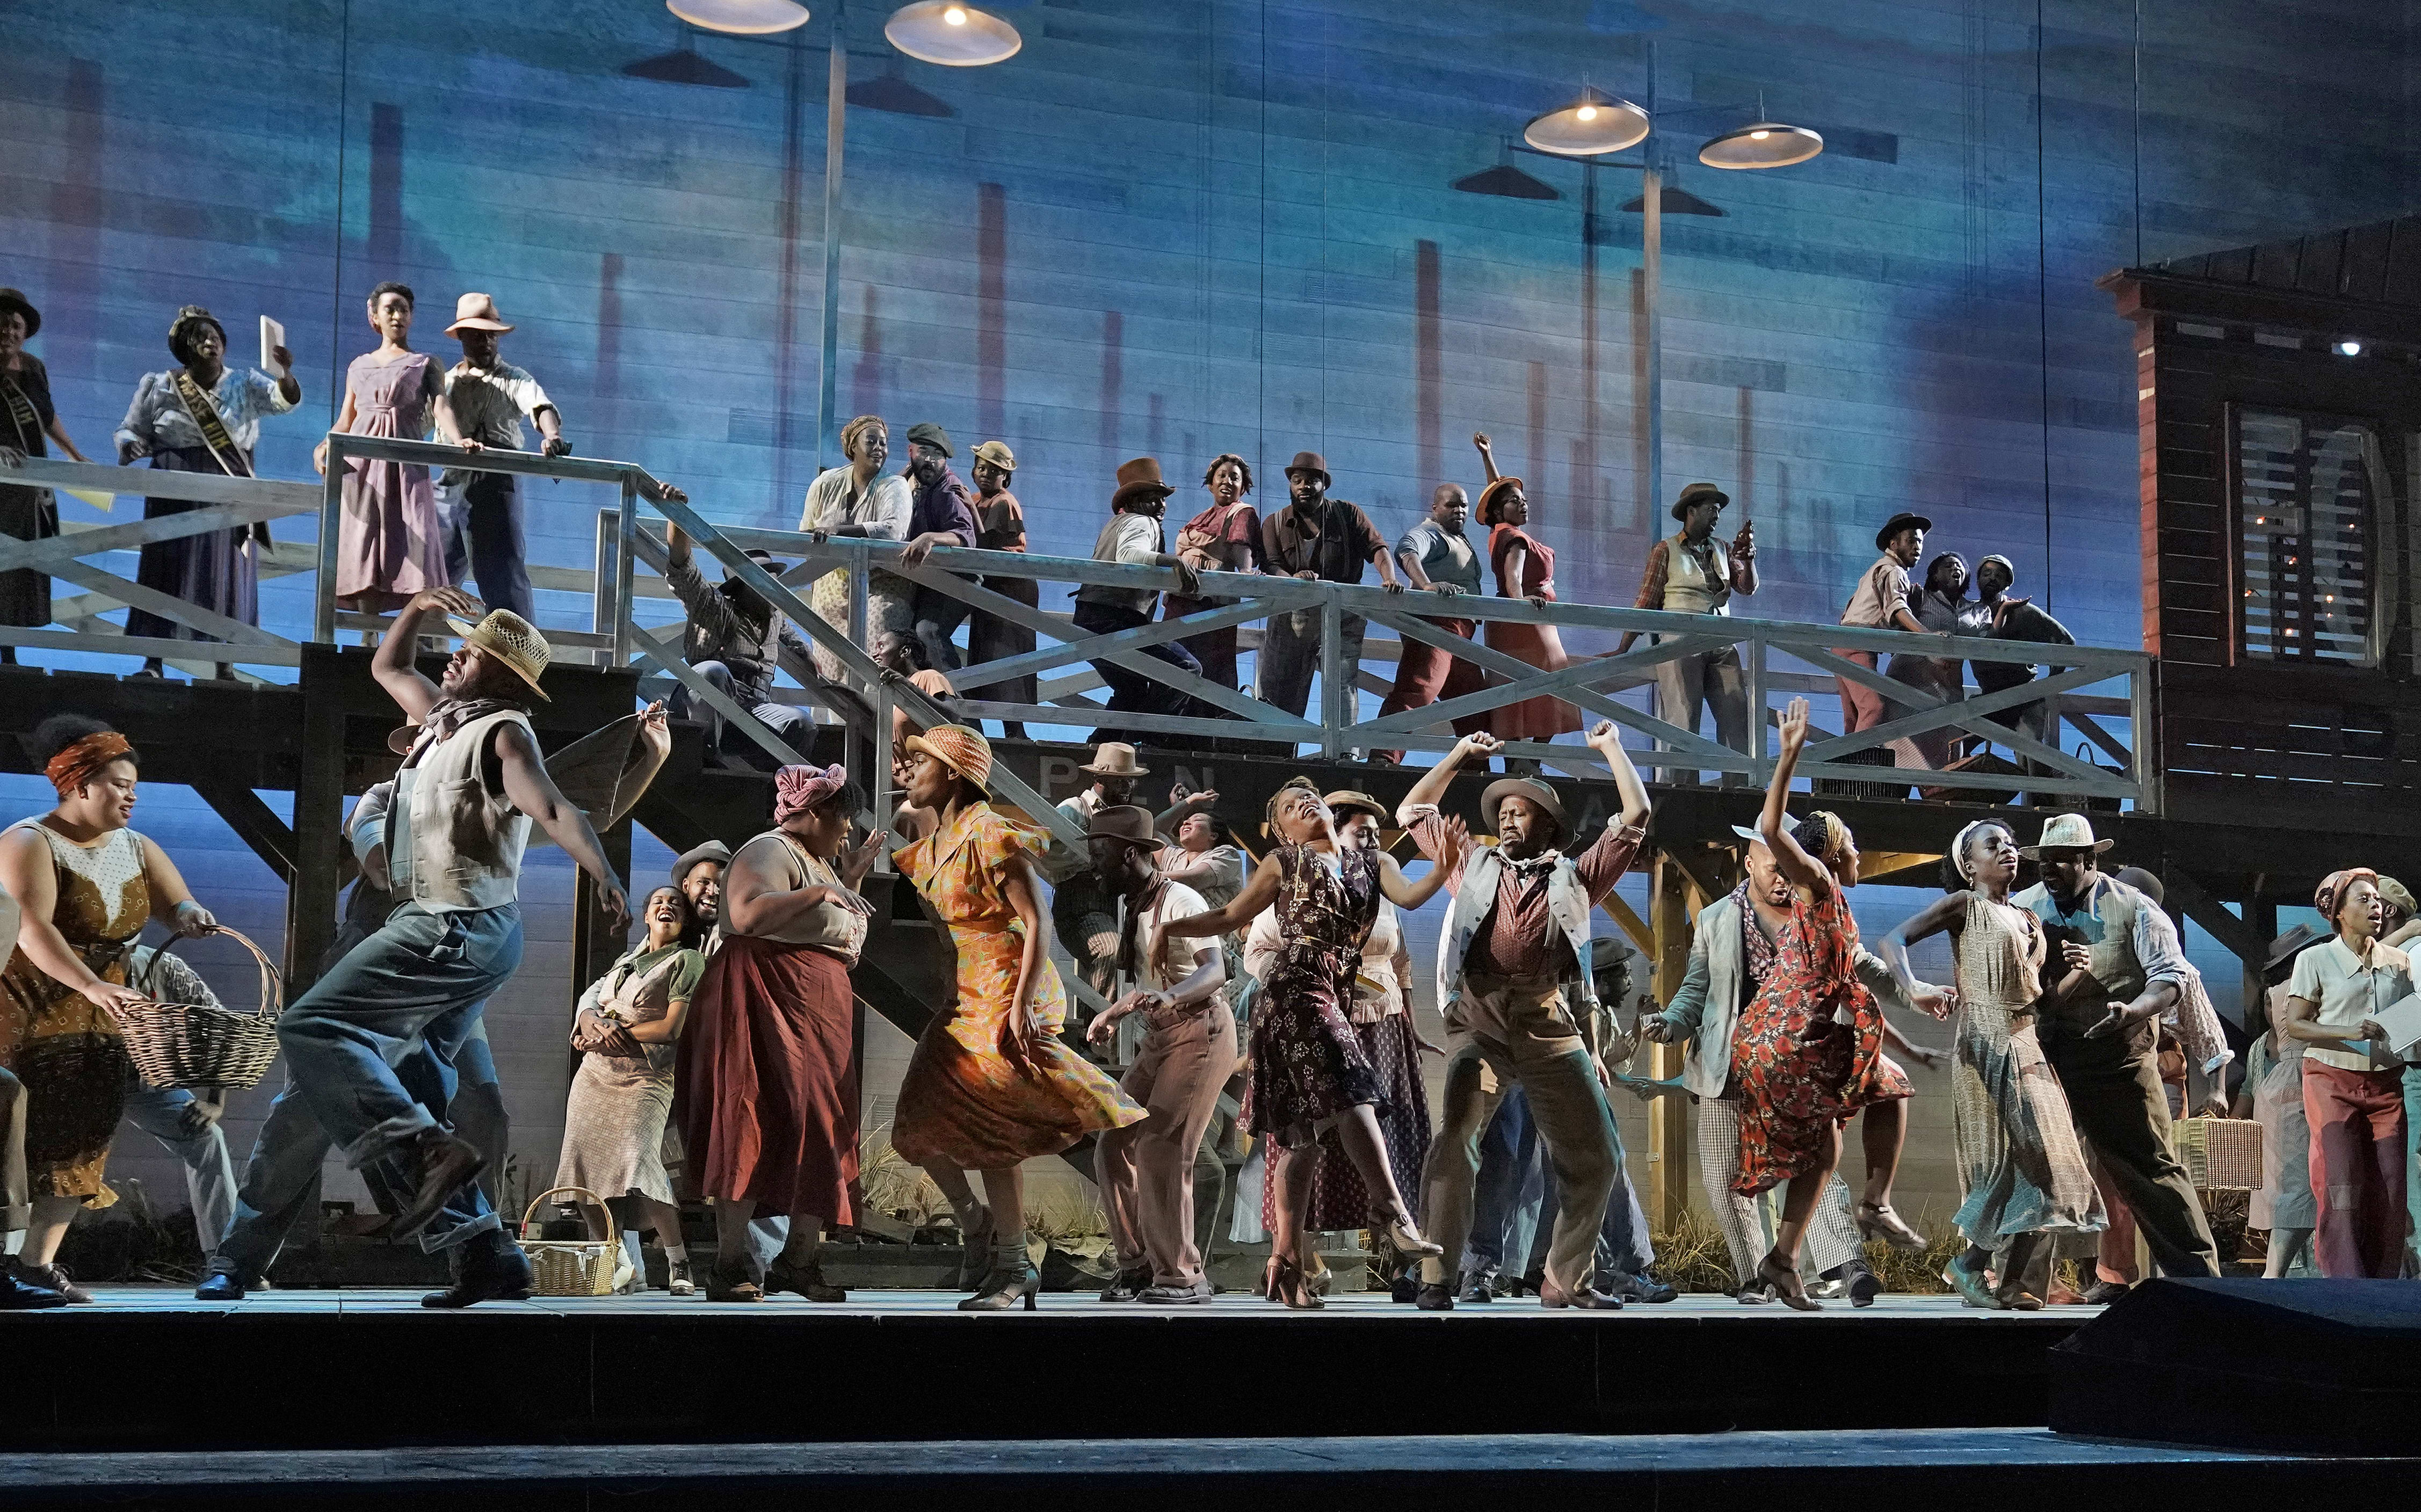 A scene from Porgy and Bess at The Met